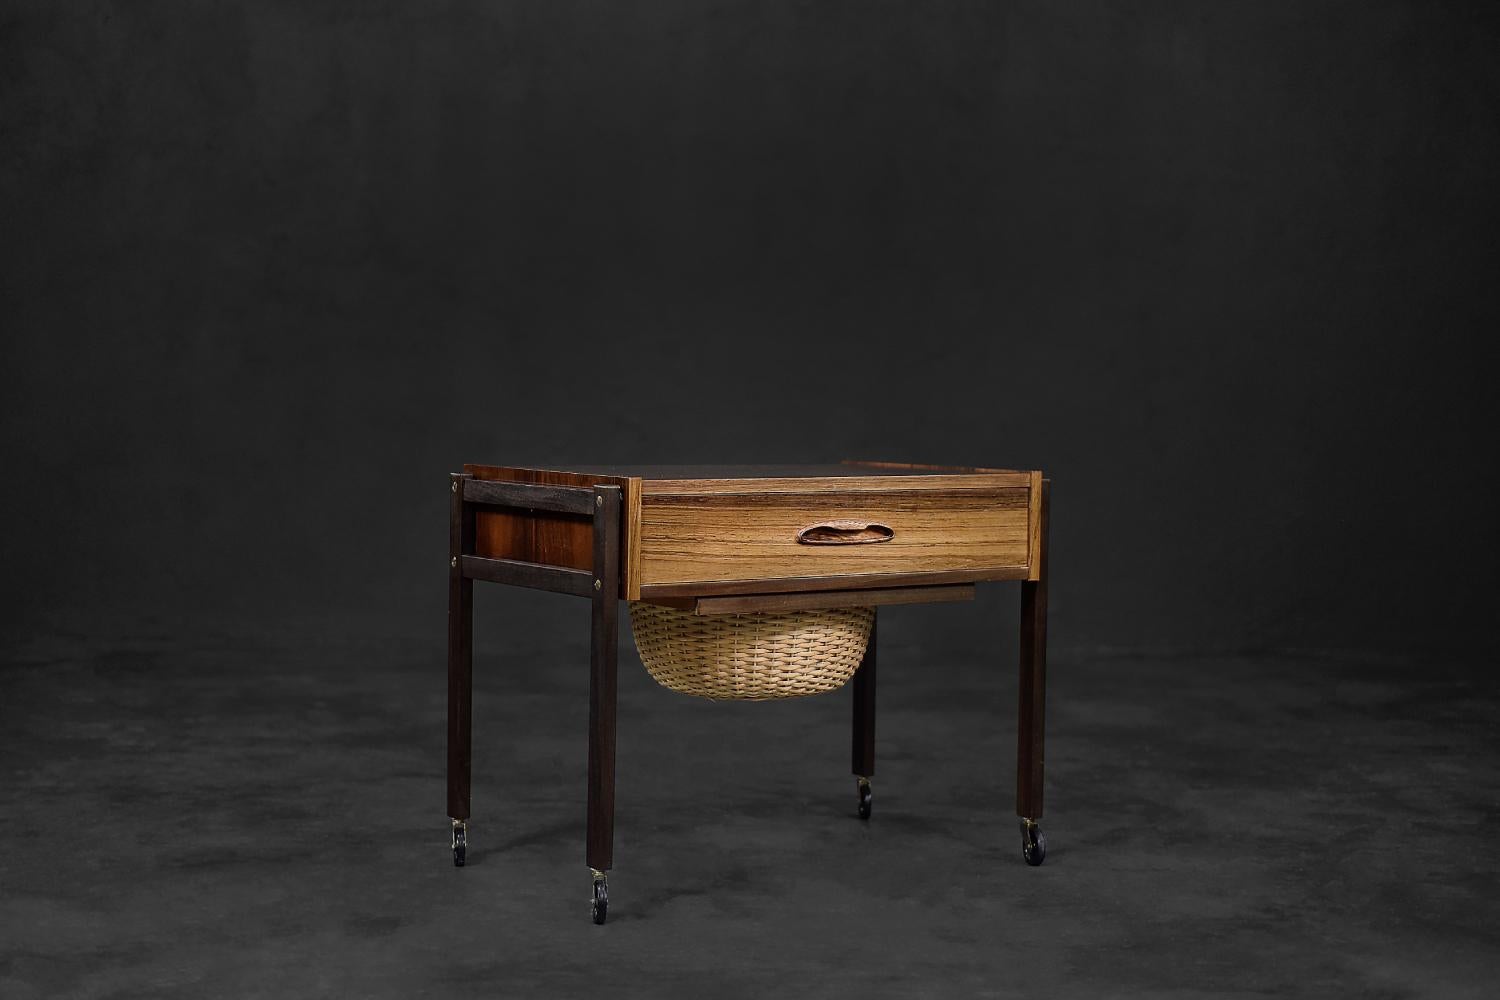 This mobile thread table was made in Denmark during the 1960s. It is made of rosewood in a dark shade of brown. It has a drawer with four compartments and a pull-out wicker basket. The legs are finished with small wheels, which allows for free